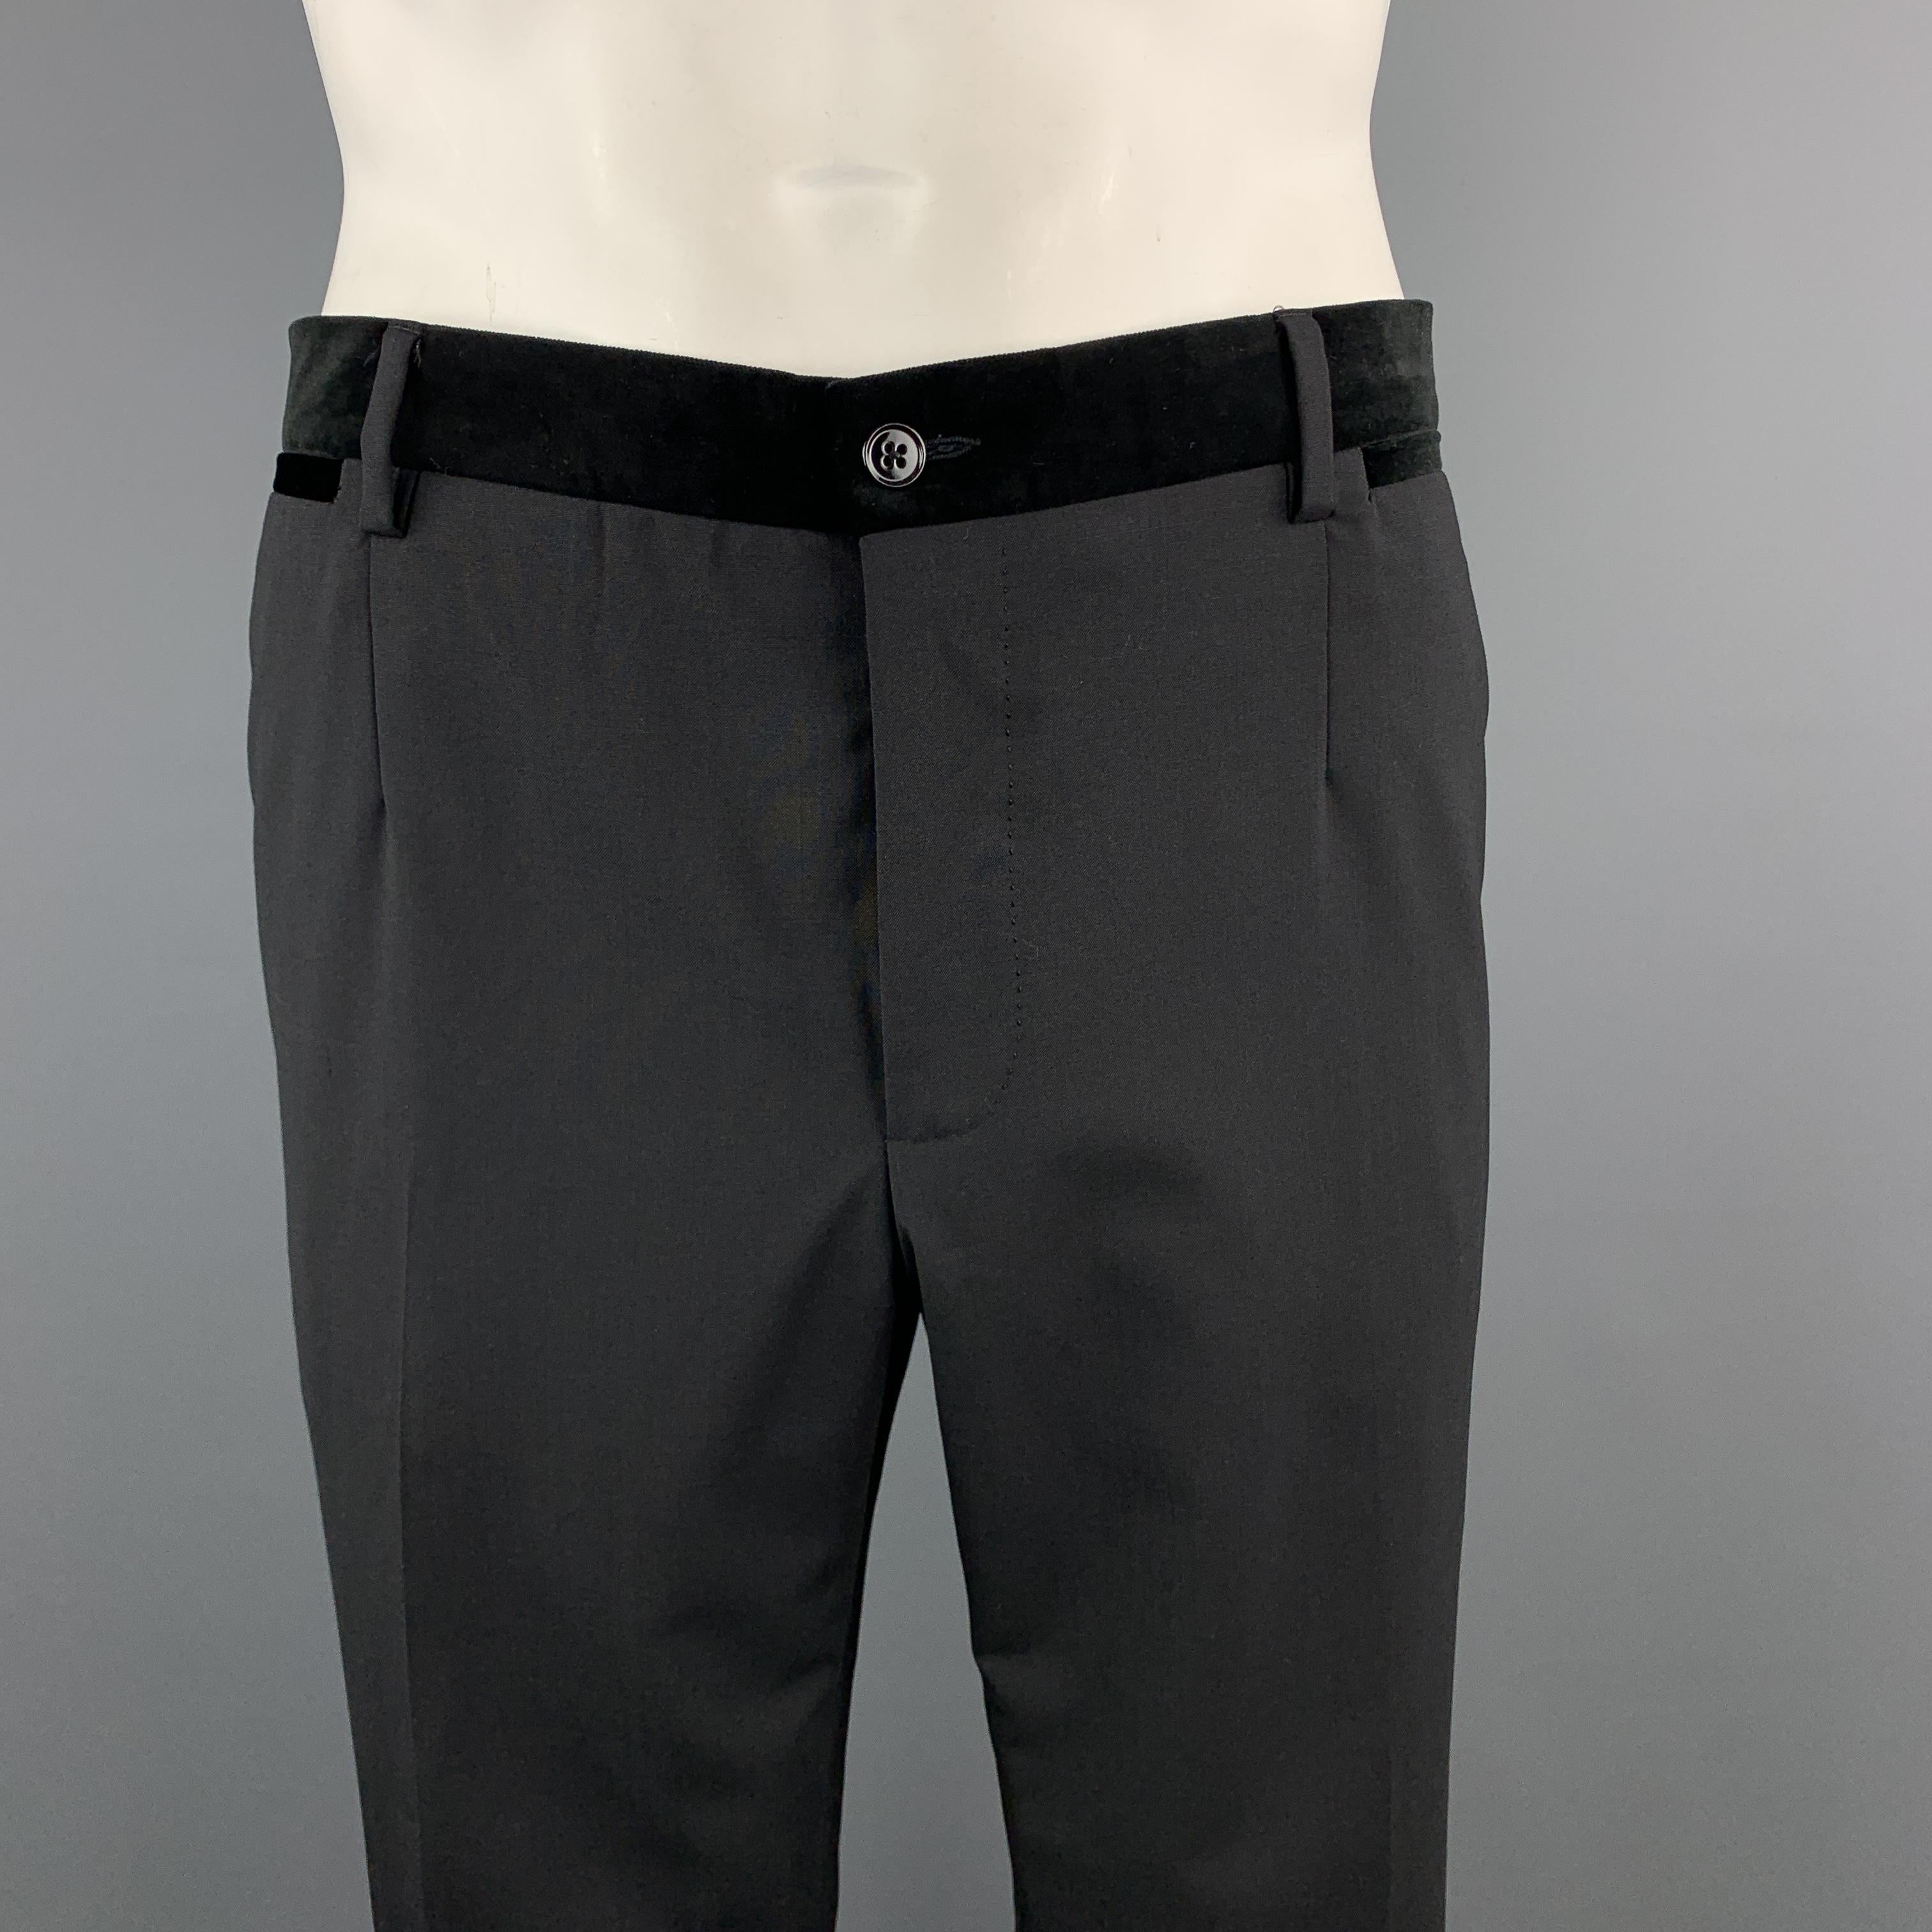 DOLCE & GABBANA dress pants come in black wool with a velvet waistband, flat front, and tuxedo side stripe. Made in Italy.

Excellent Pre-Owned Condition.
Marked: IT 54

Measurements:

Waist: 38 in.
Rise: 10 in.
Inseam: 31 in.